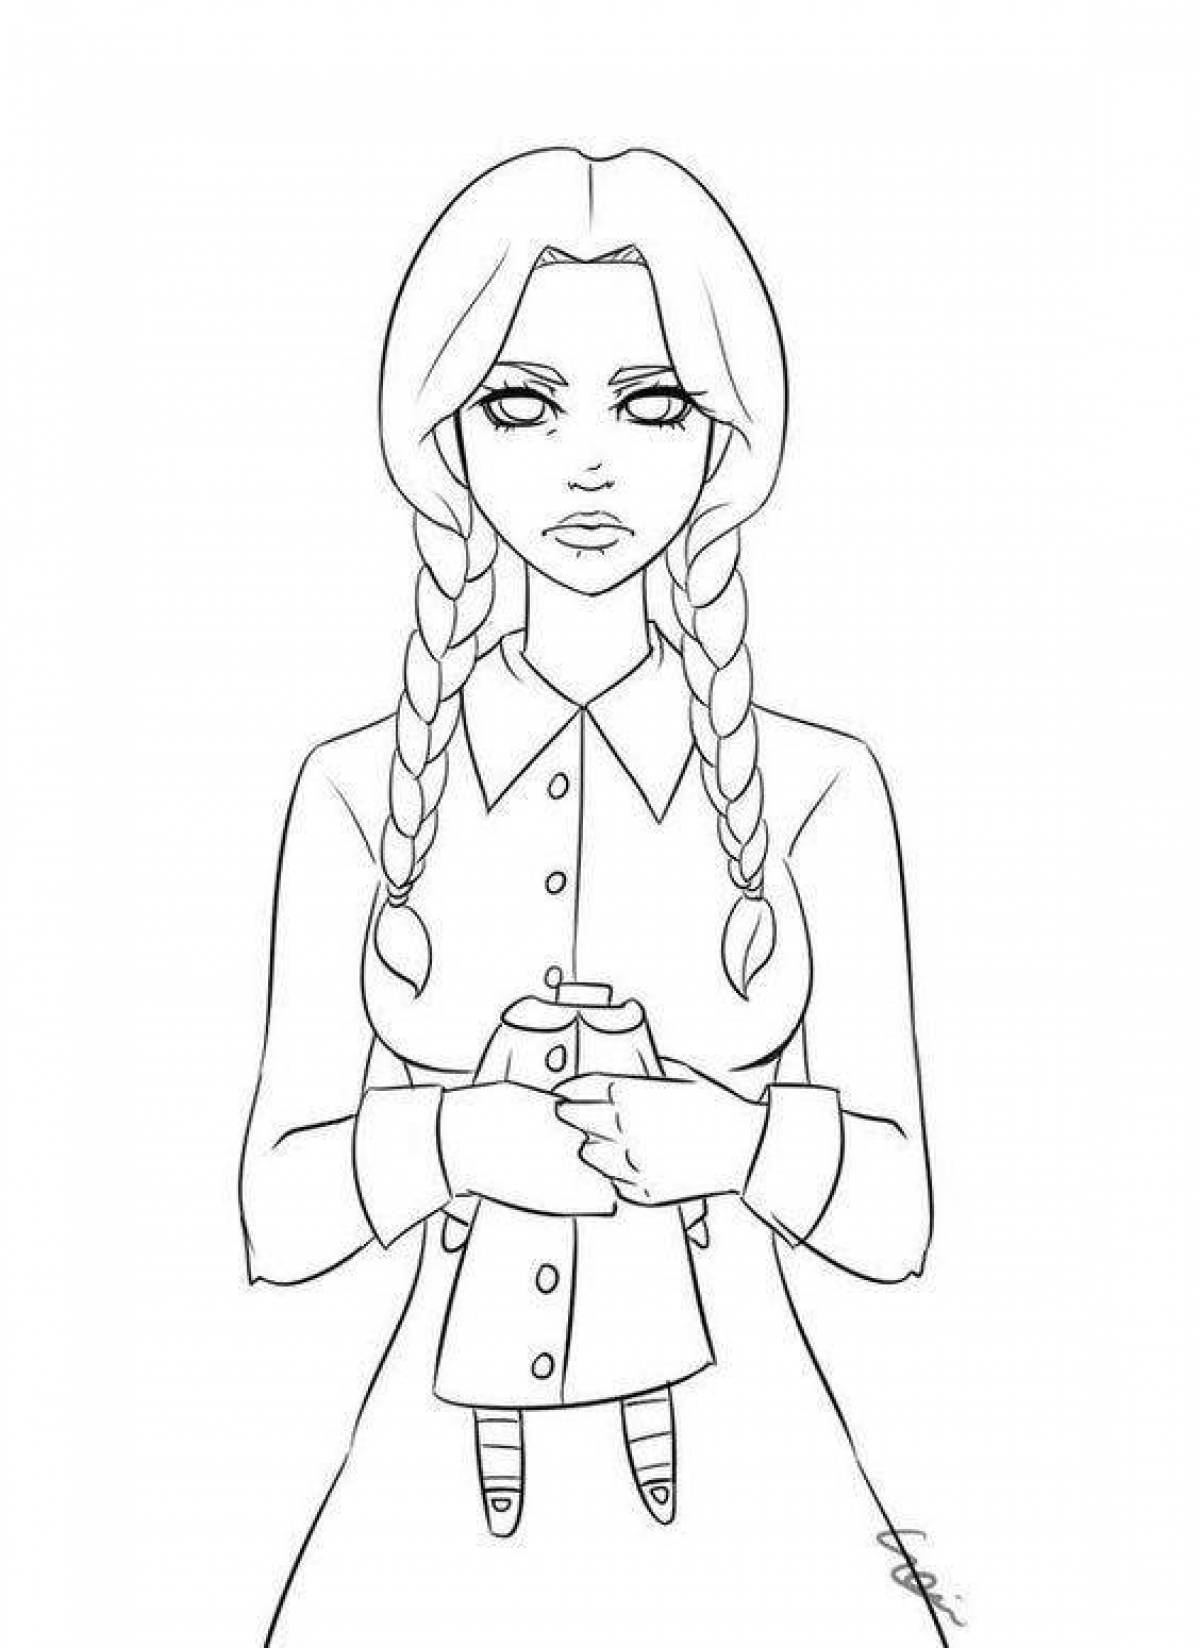 Full length Wednesday holiday coloring page